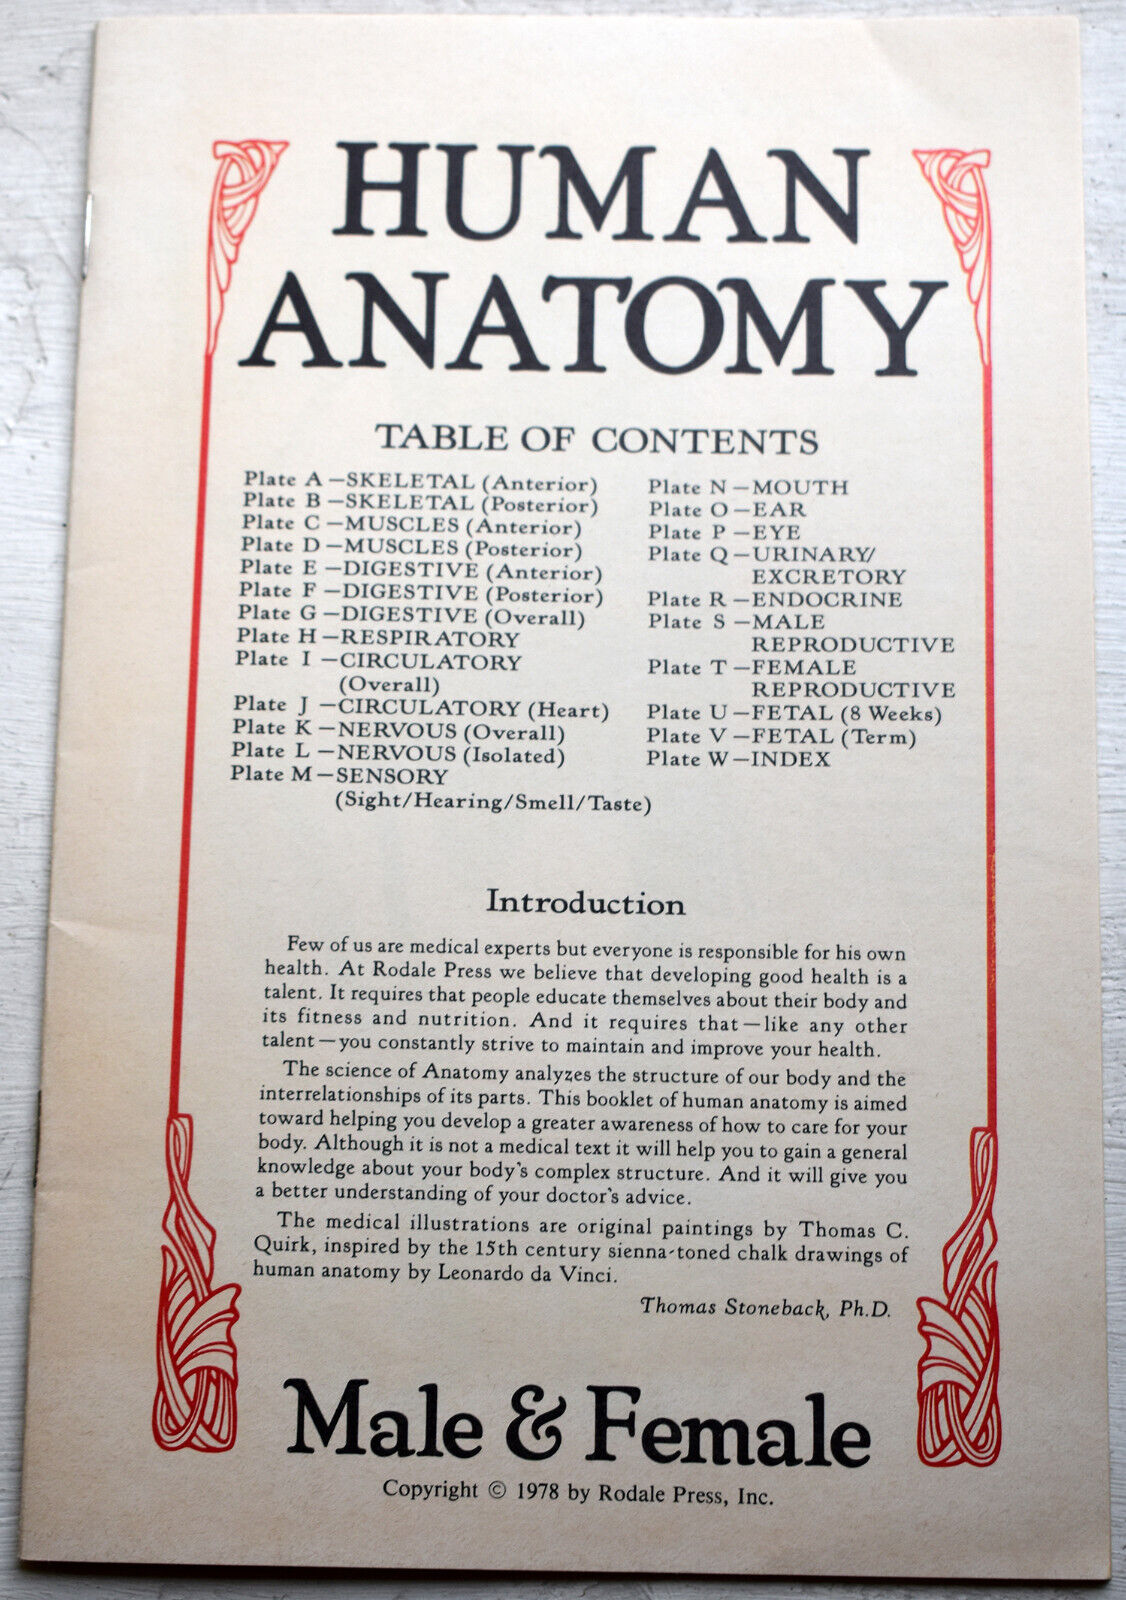 Details about Human Anatomy Male & Female medical booklet Rodale Press 1978